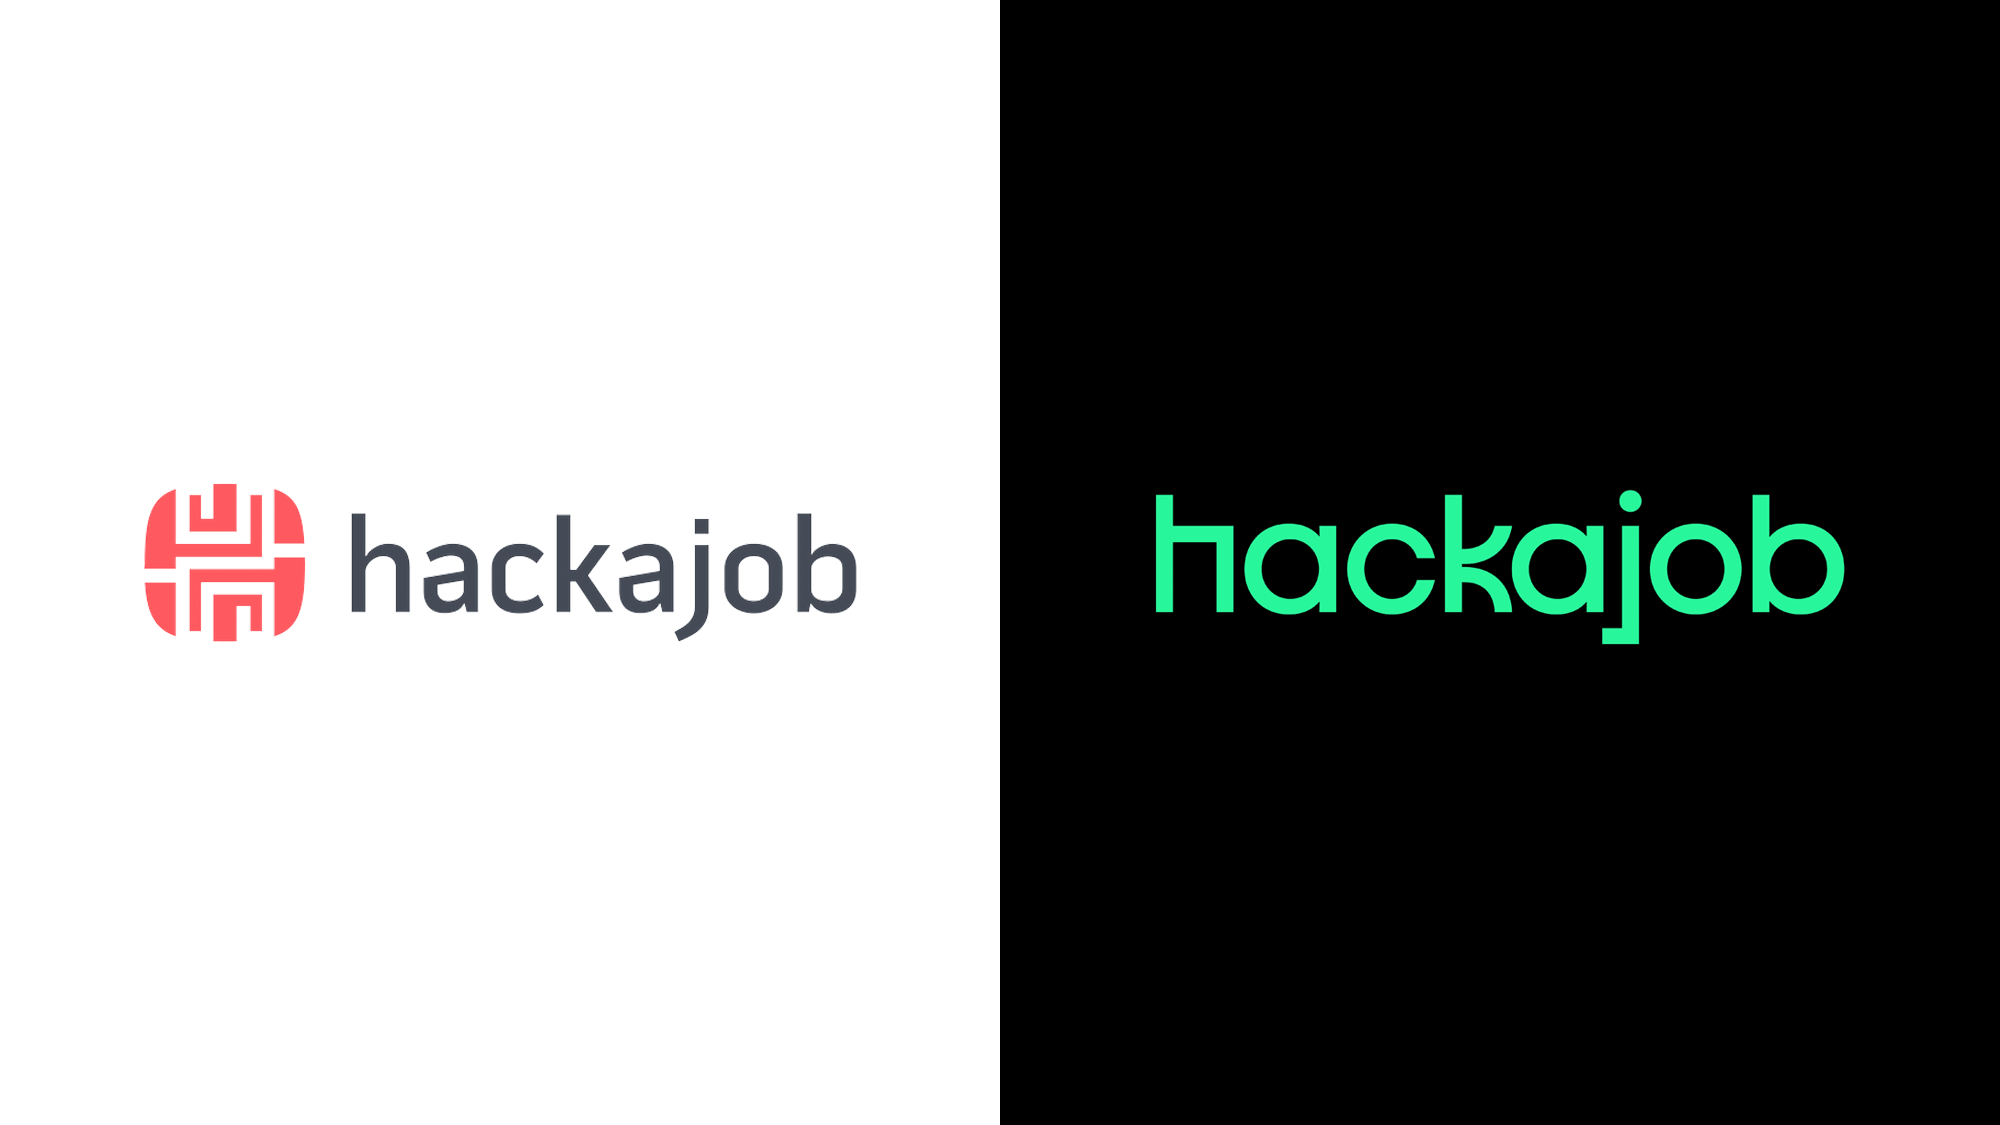 Brand New: New Logo and Identity for Hackajob by Droga5